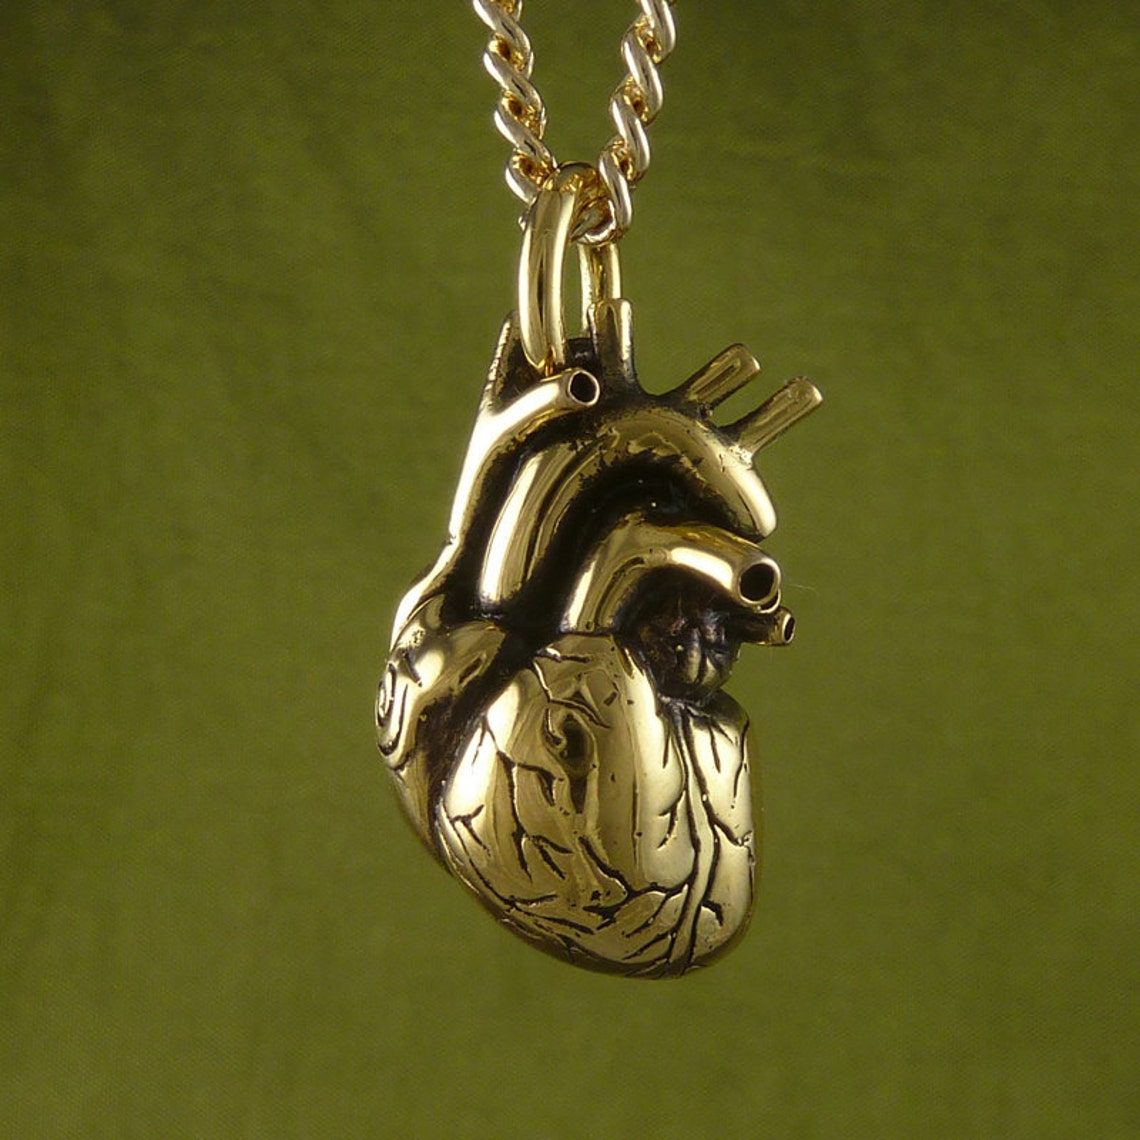 24K Gold Anatomical Heart Necklace - Goth Mall